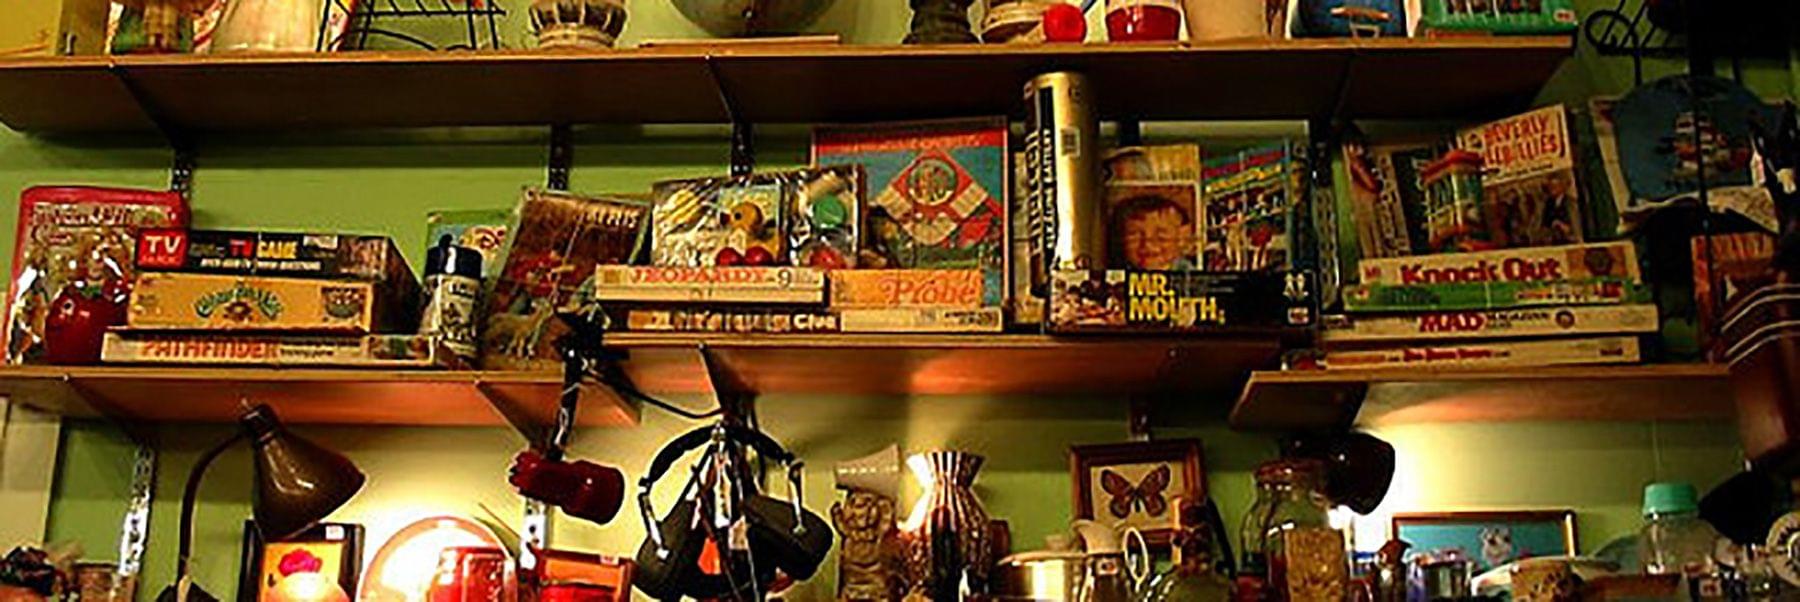 Shelf in an antique shop cluttered with games, lamps, and other household items.